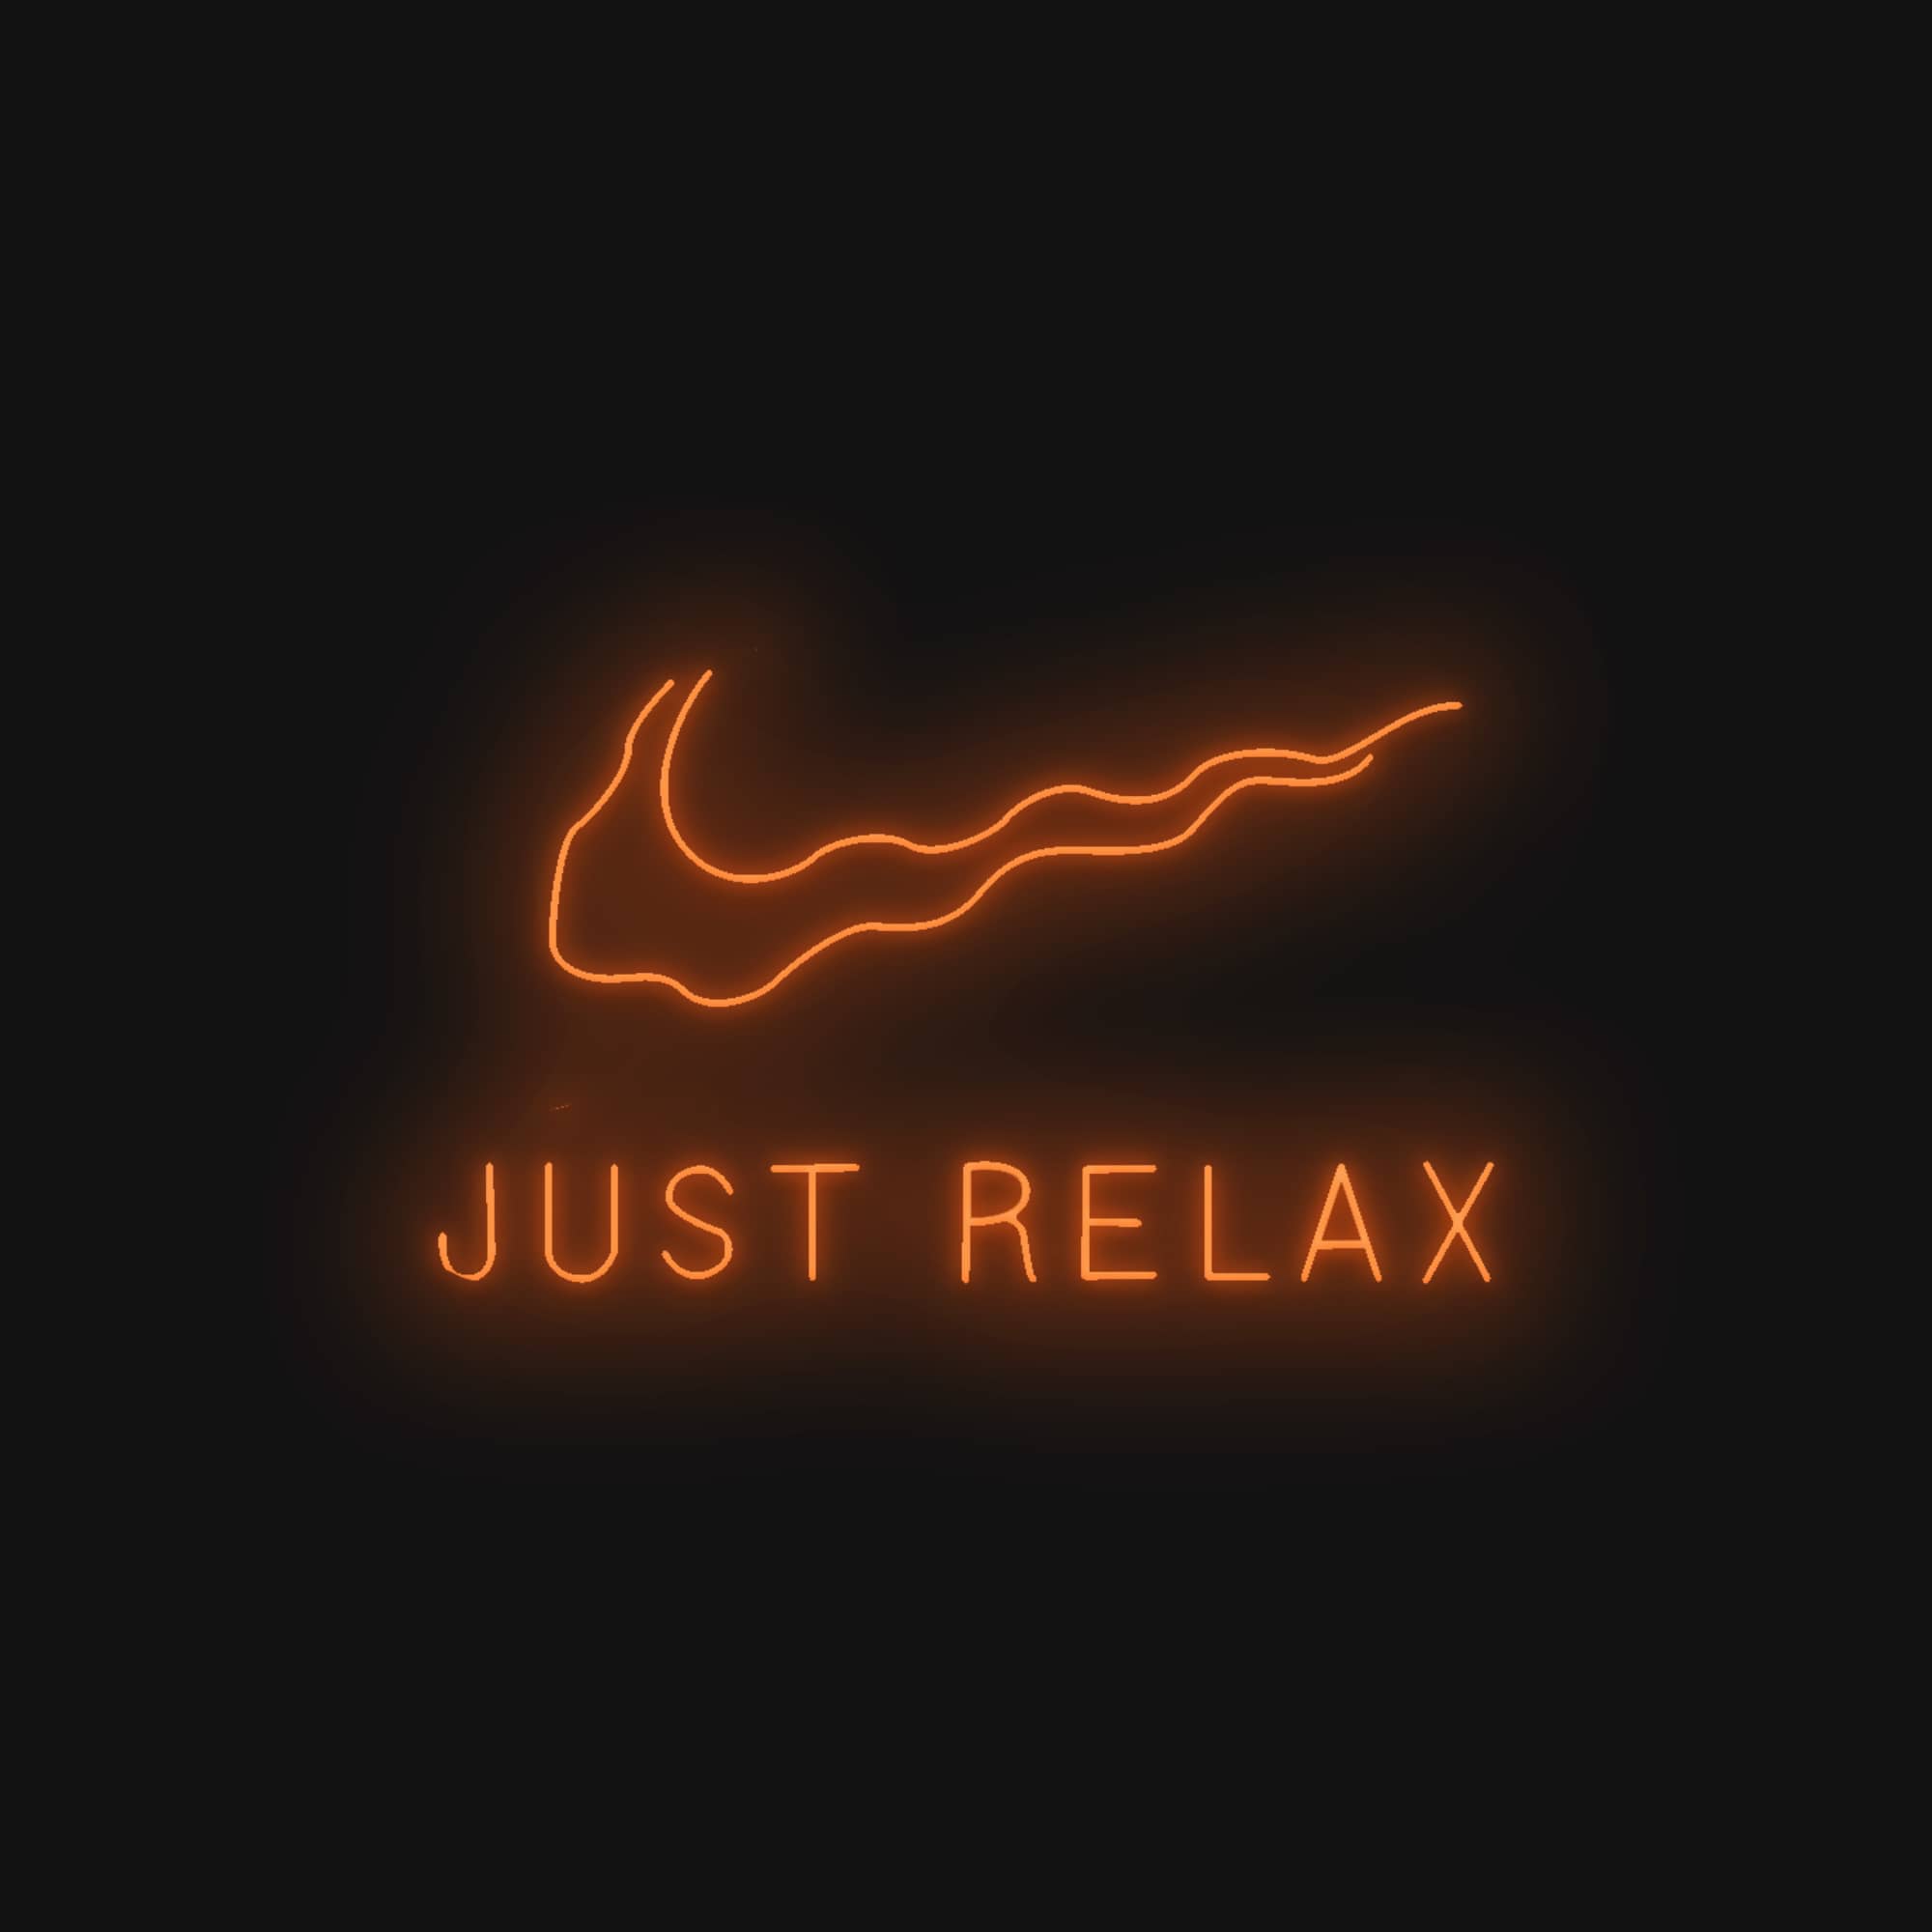 Just Relax - Neon Deco